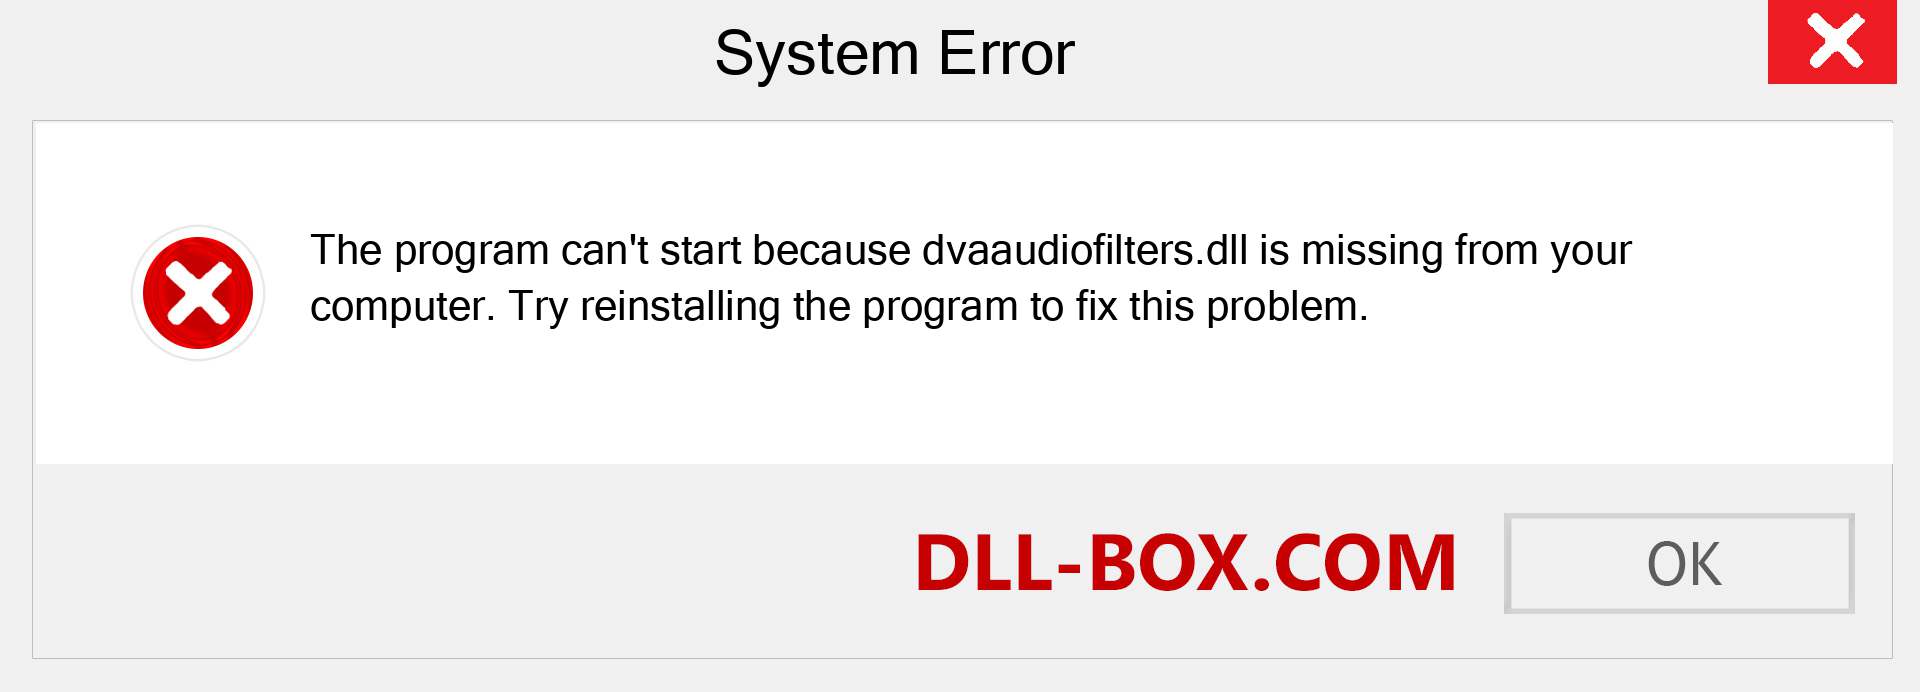  dvaaudiofilters.dll file is missing?. Download for Windows 7, 8, 10 - Fix  dvaaudiofilters dll Missing Error on Windows, photos, images